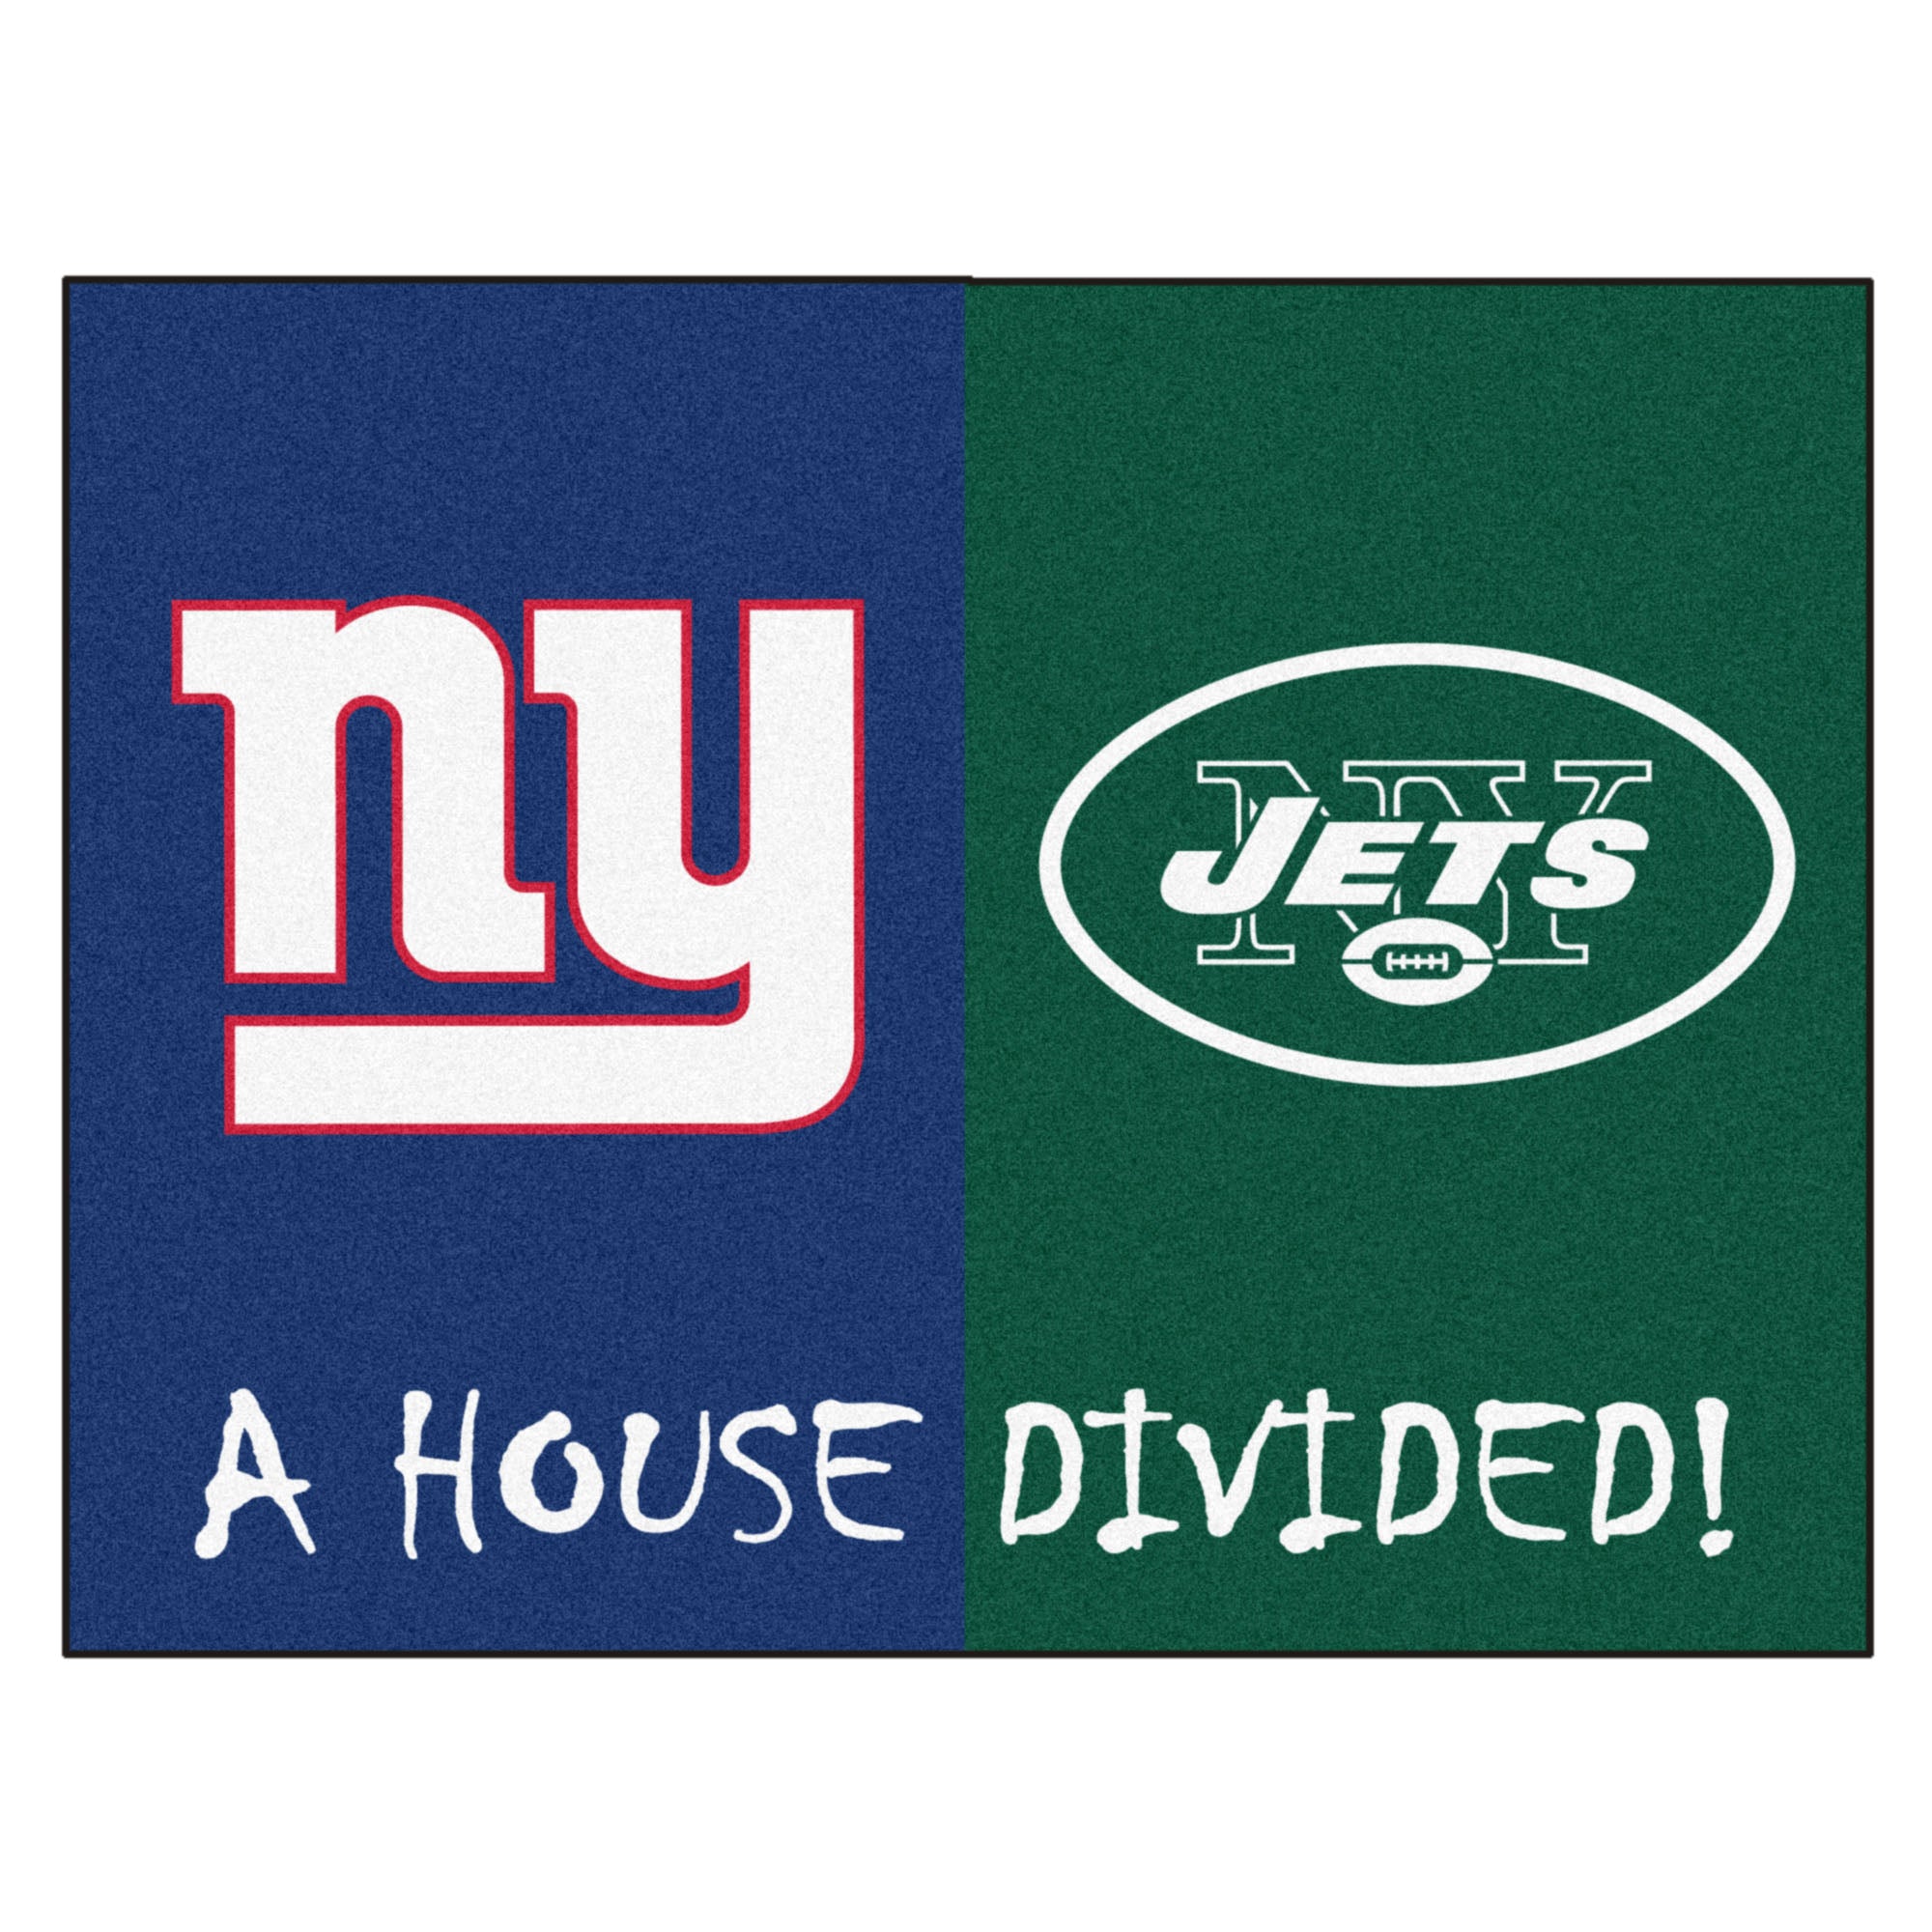 NFL House Divided - Giants / Jets House Divided Mat